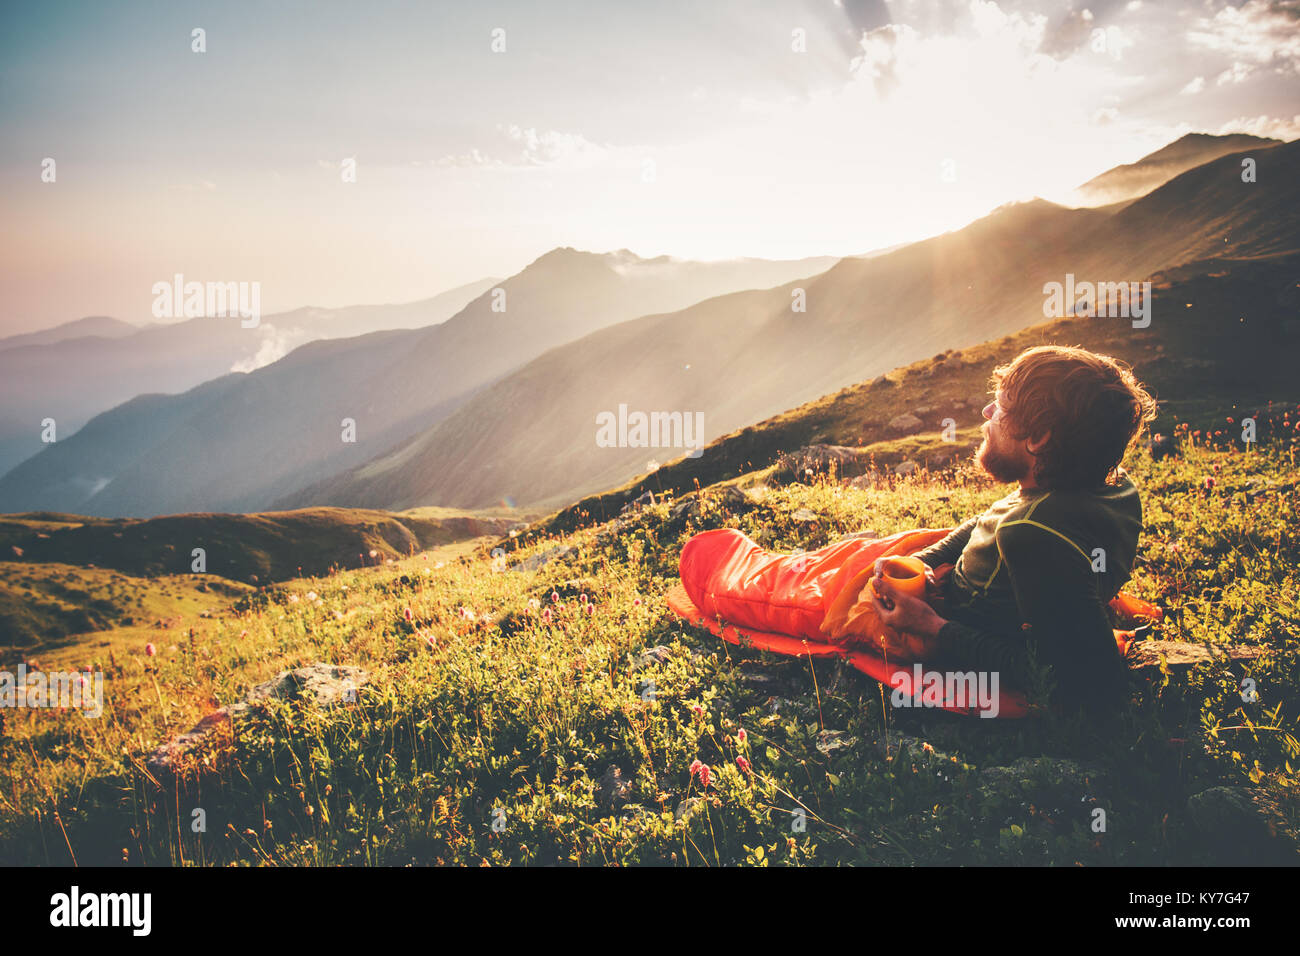 Man relaxing in sleeping bag enjoying sunset mountains landscape Travel Lifestyle camping concept adventure summer vacations outdoor hiking mountainee Stock Photo